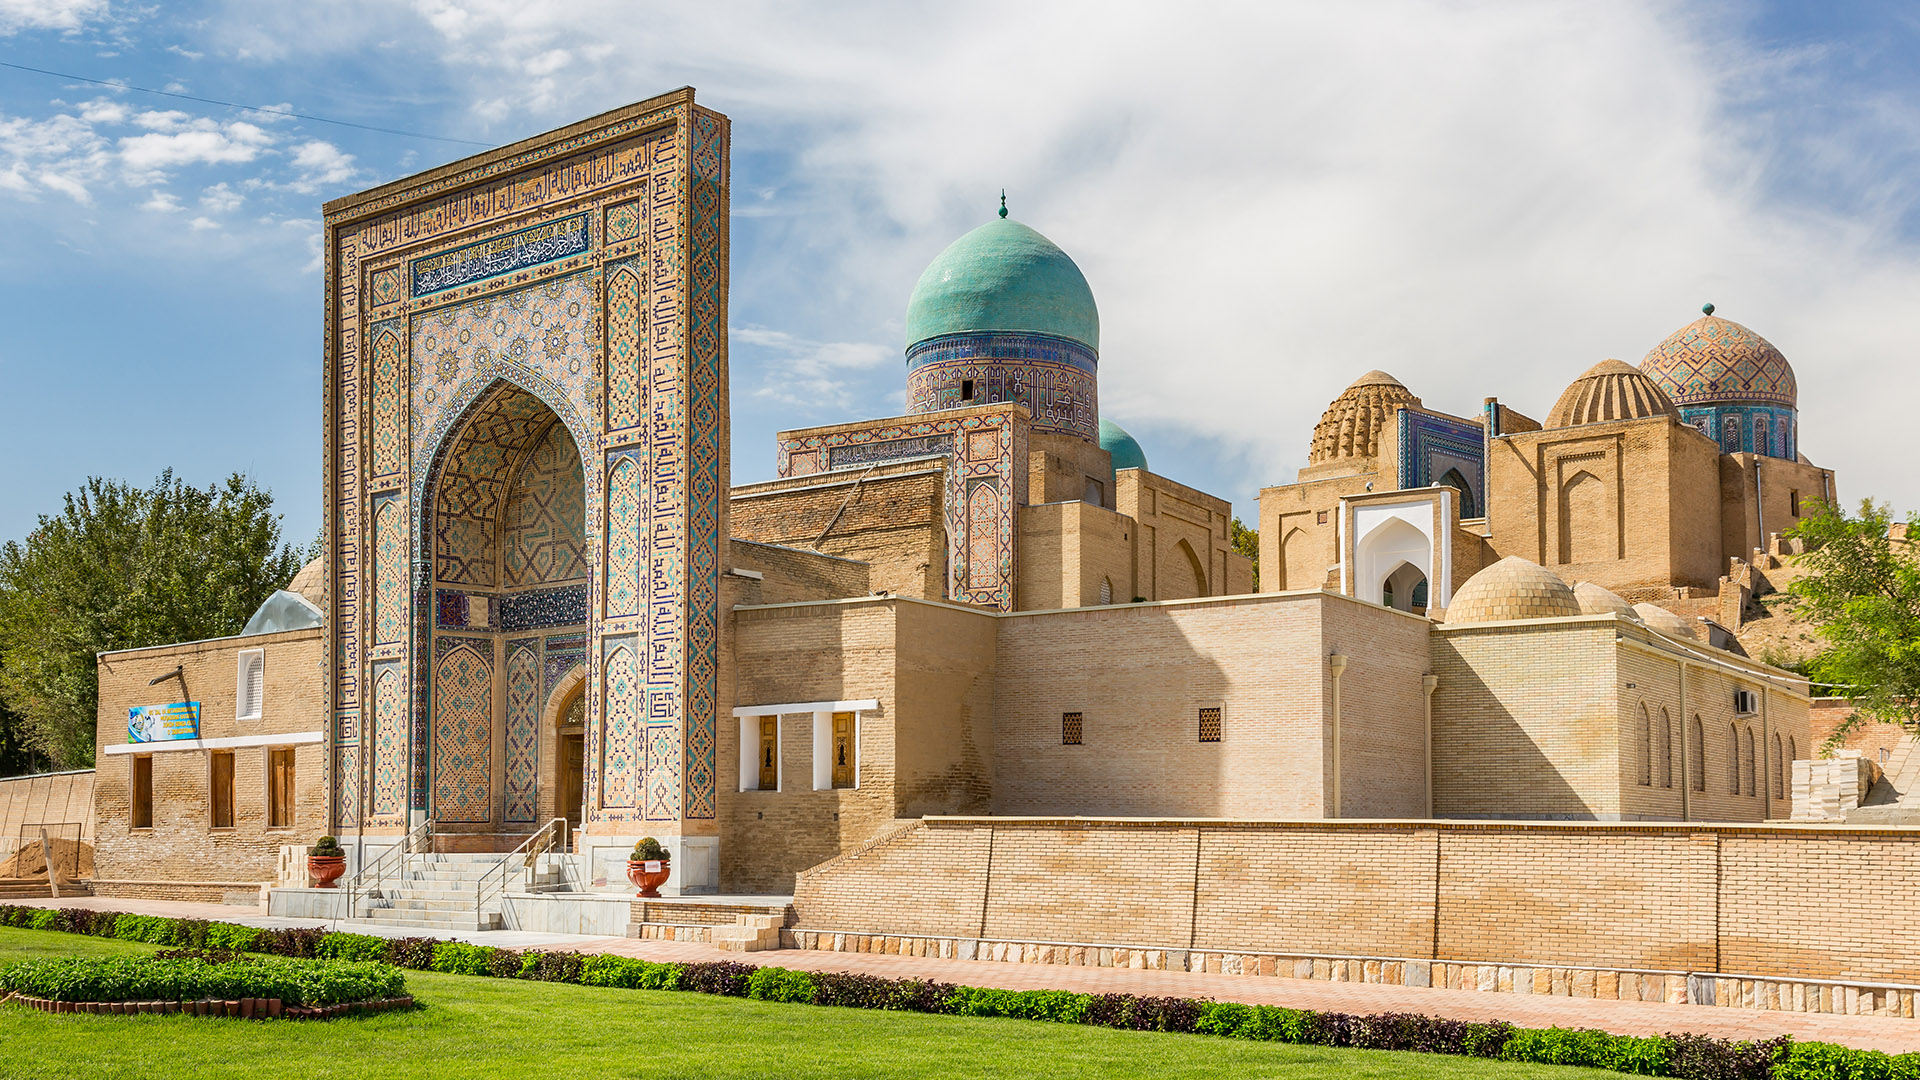 Mausoleums in Central Asia